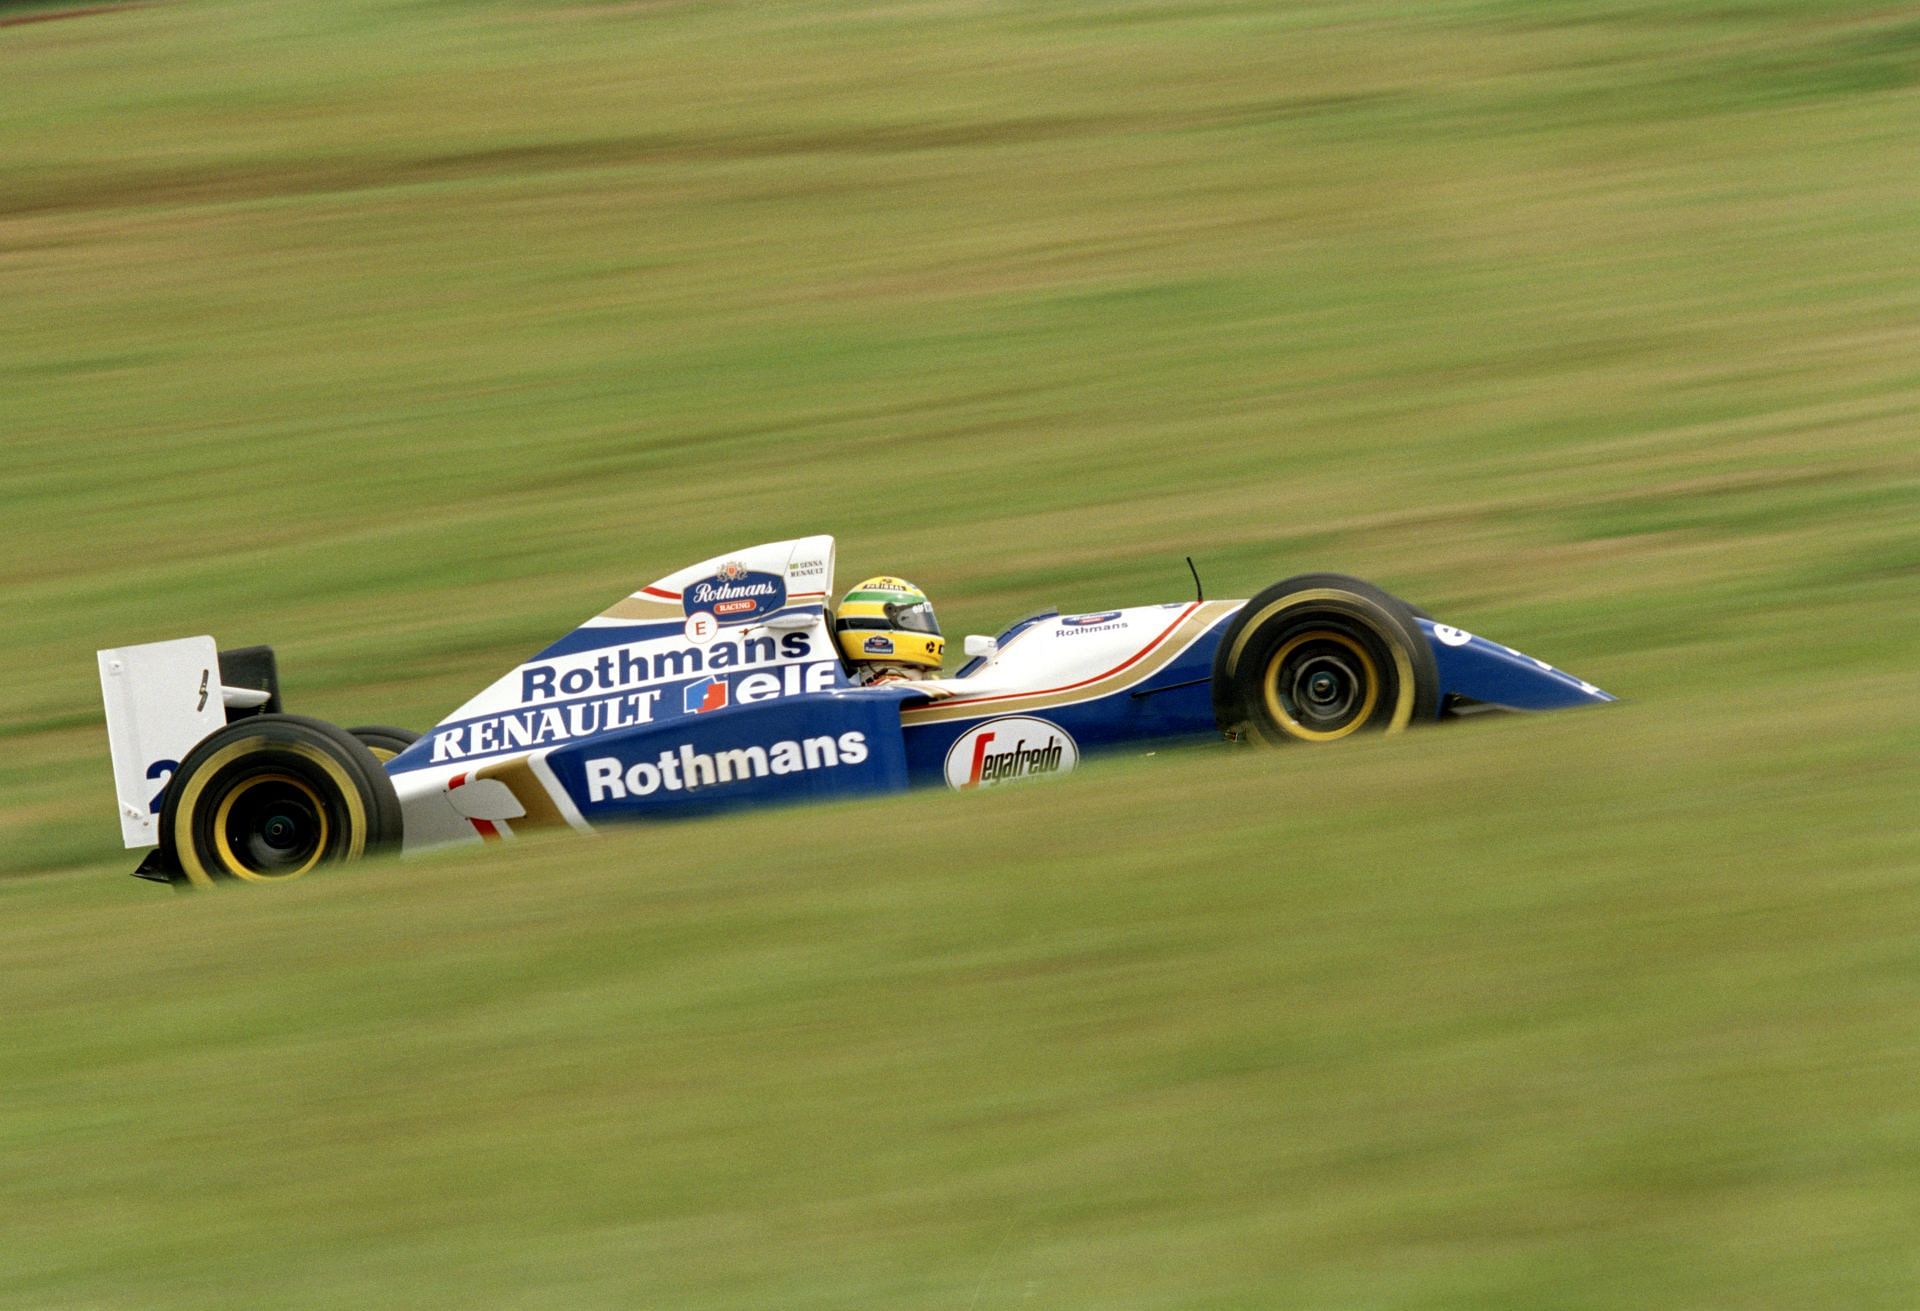 Ayrton Senna drives the Williams FW16 during the 1994 F1 Grand Prix of Brazil (Photo by Mike Hewitt/Getty Images)